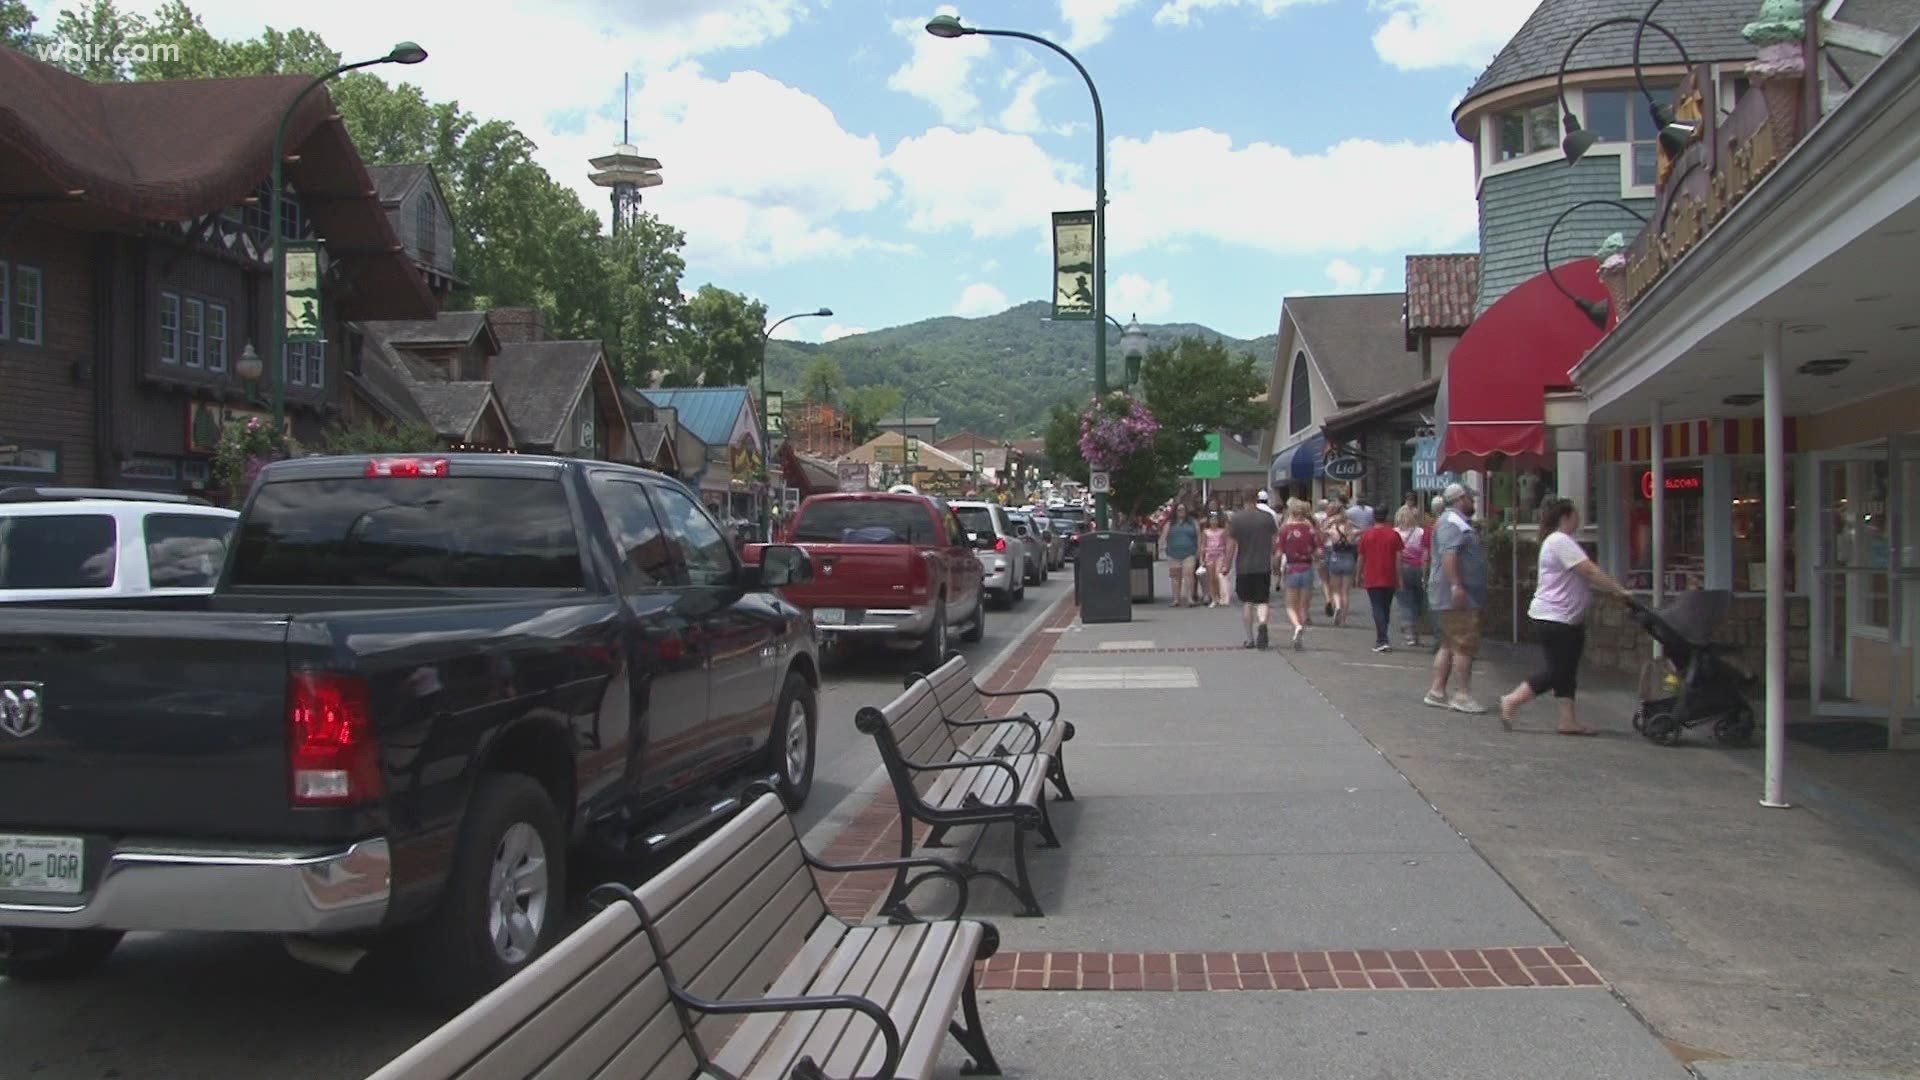 The gateway to the Smokies grows in visits every year. Bu that crush of visitors in Gatlinburg raises more worries about traffic.